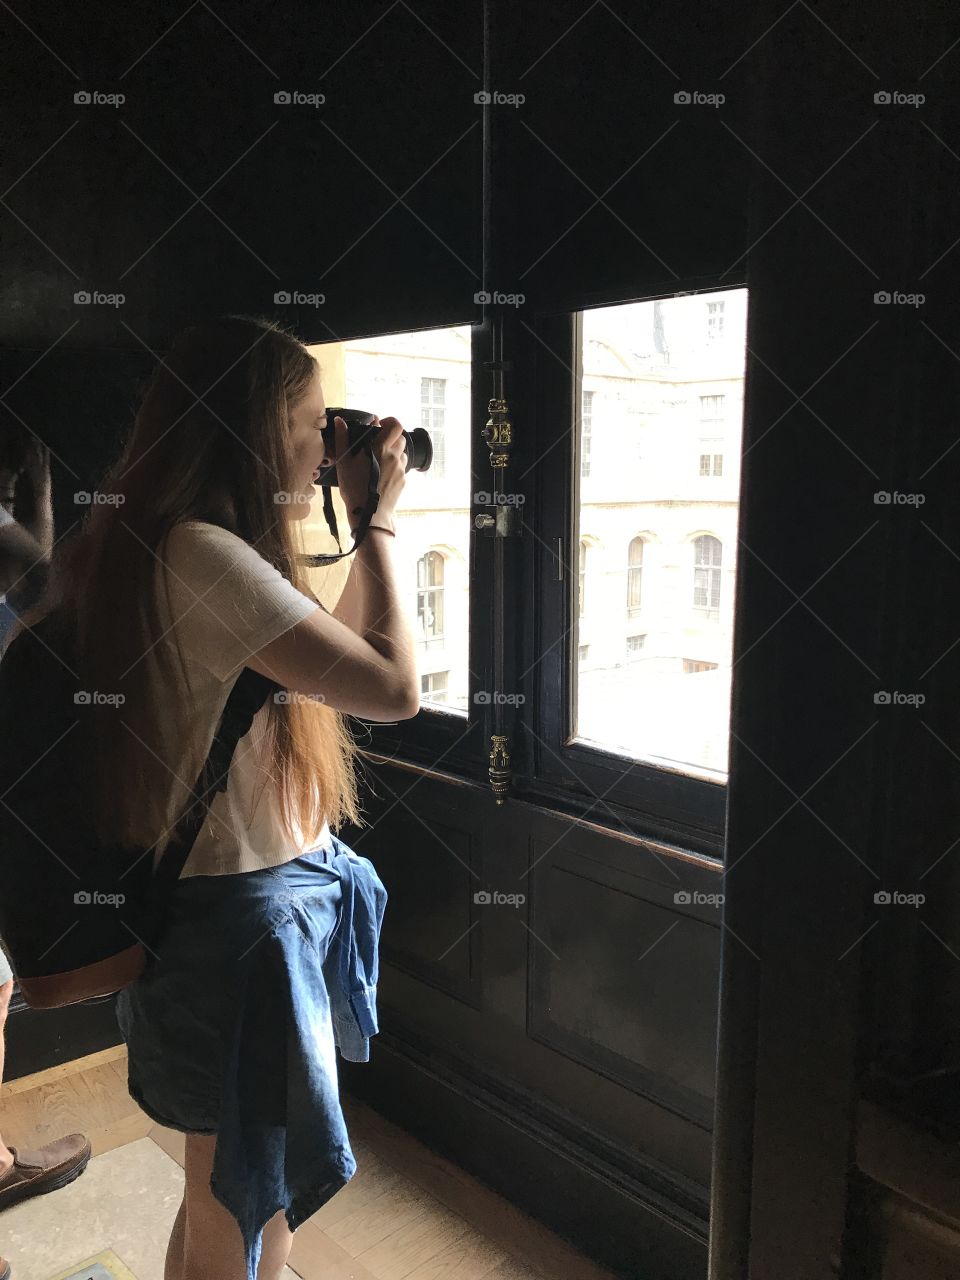 Woman taking photograph with camera from glass window